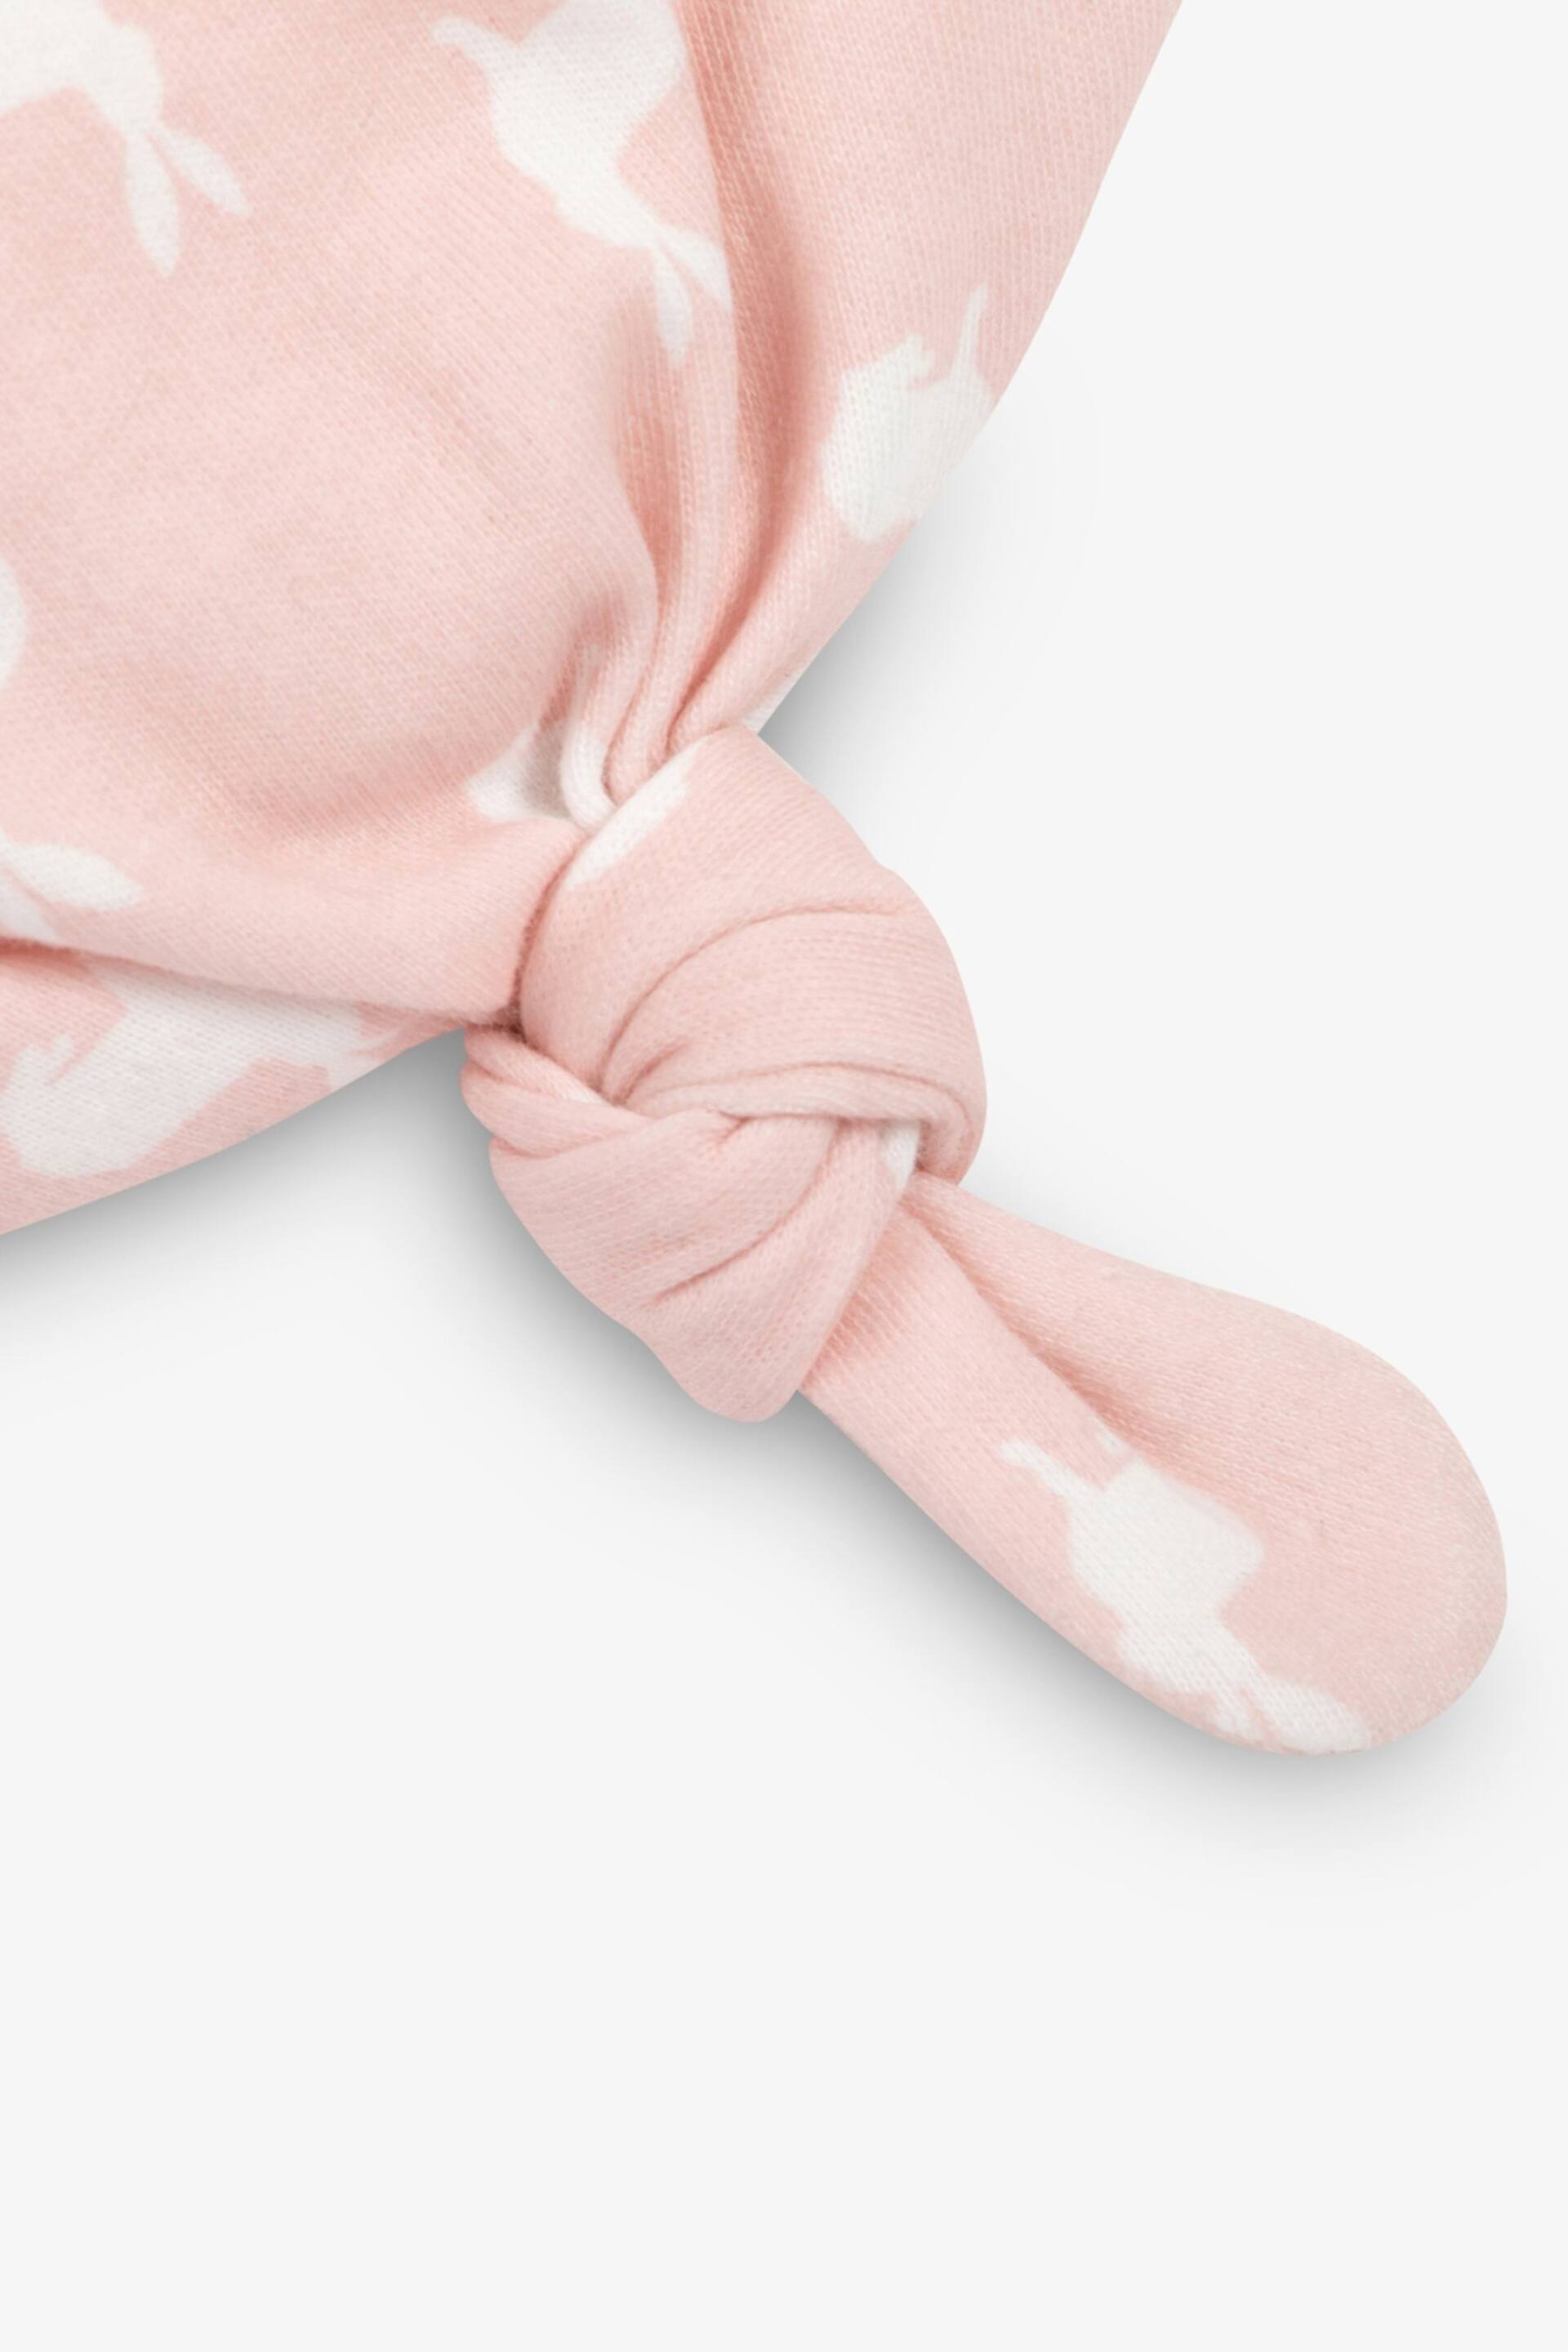 The Little Tailor Pink Easter Bunny Print Luxury 3 Piece Baby Gift Set; Sleepsuit, Hat and Rubber Teether Toy - Image 9 of 10